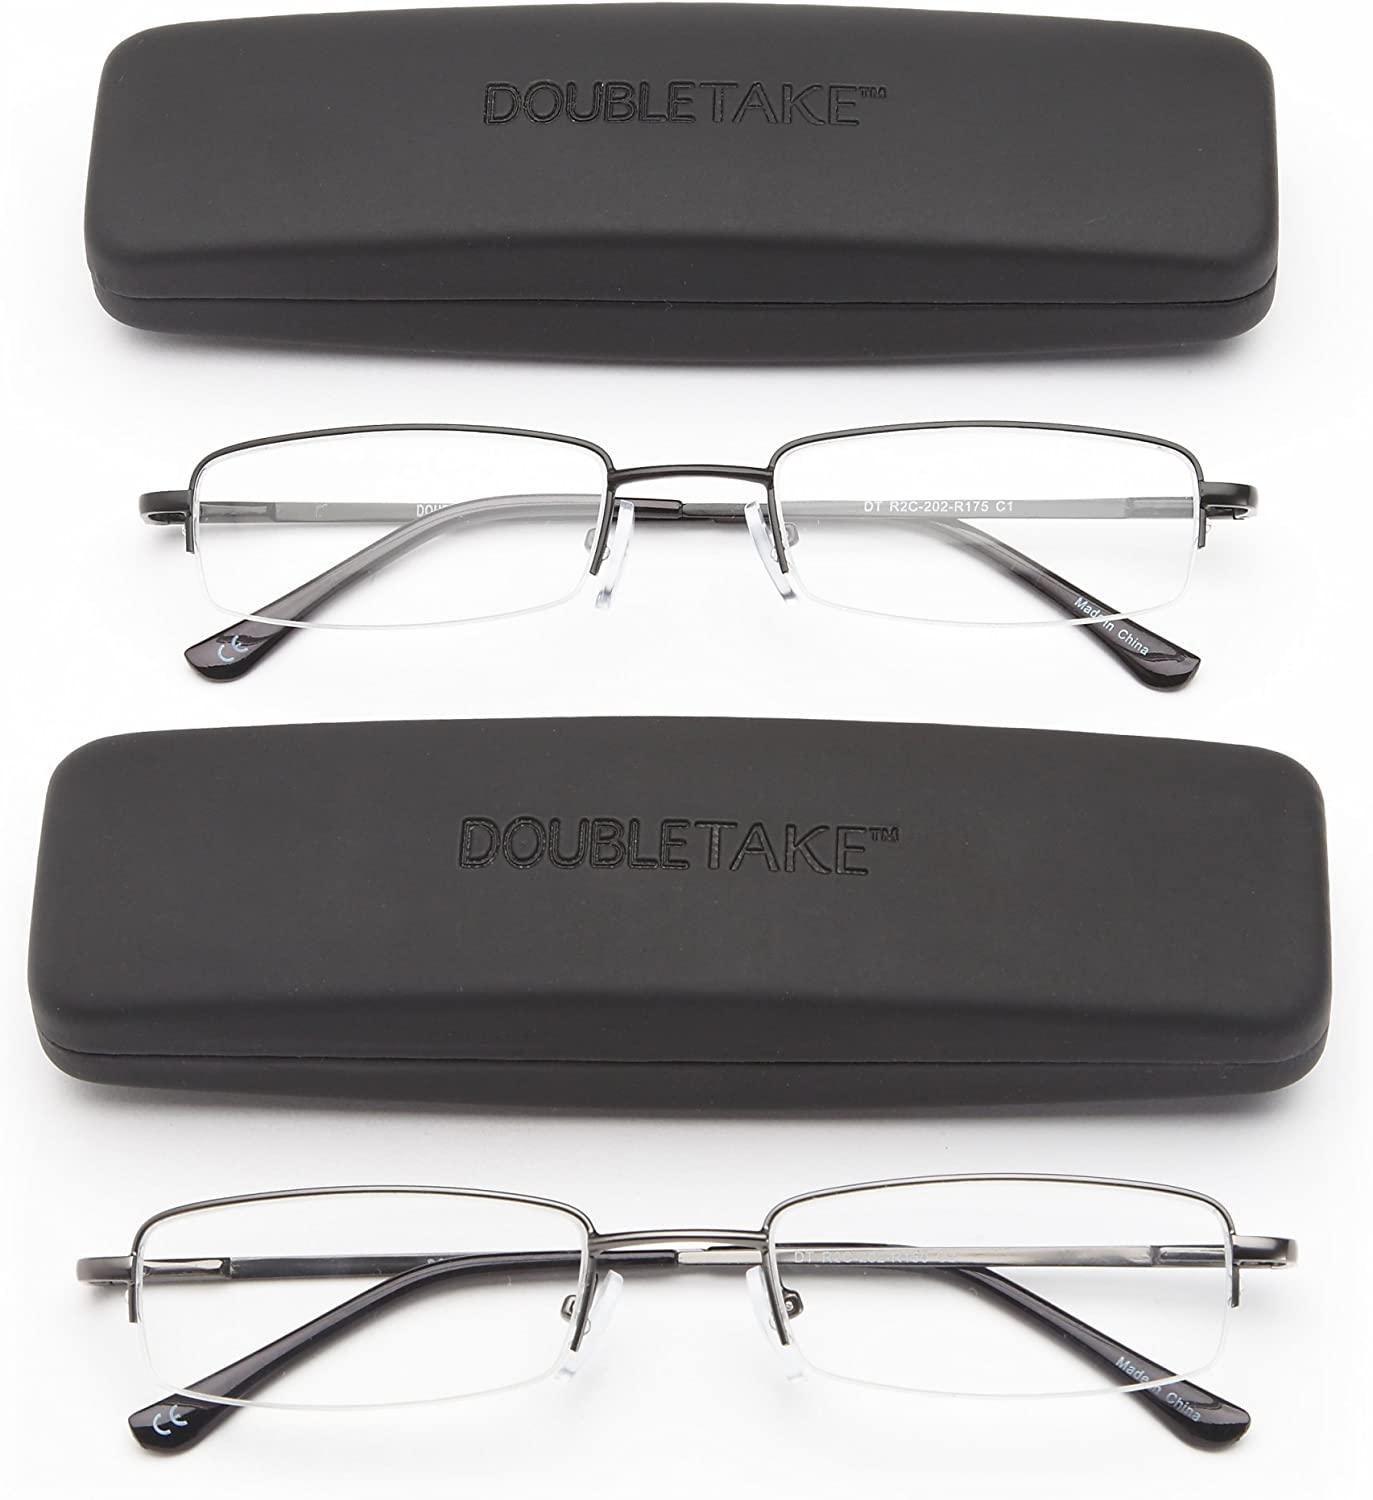 Doubletake Reading Glasses 2 Pairs Compact Case Included Semi Rimless Readers 1 75x